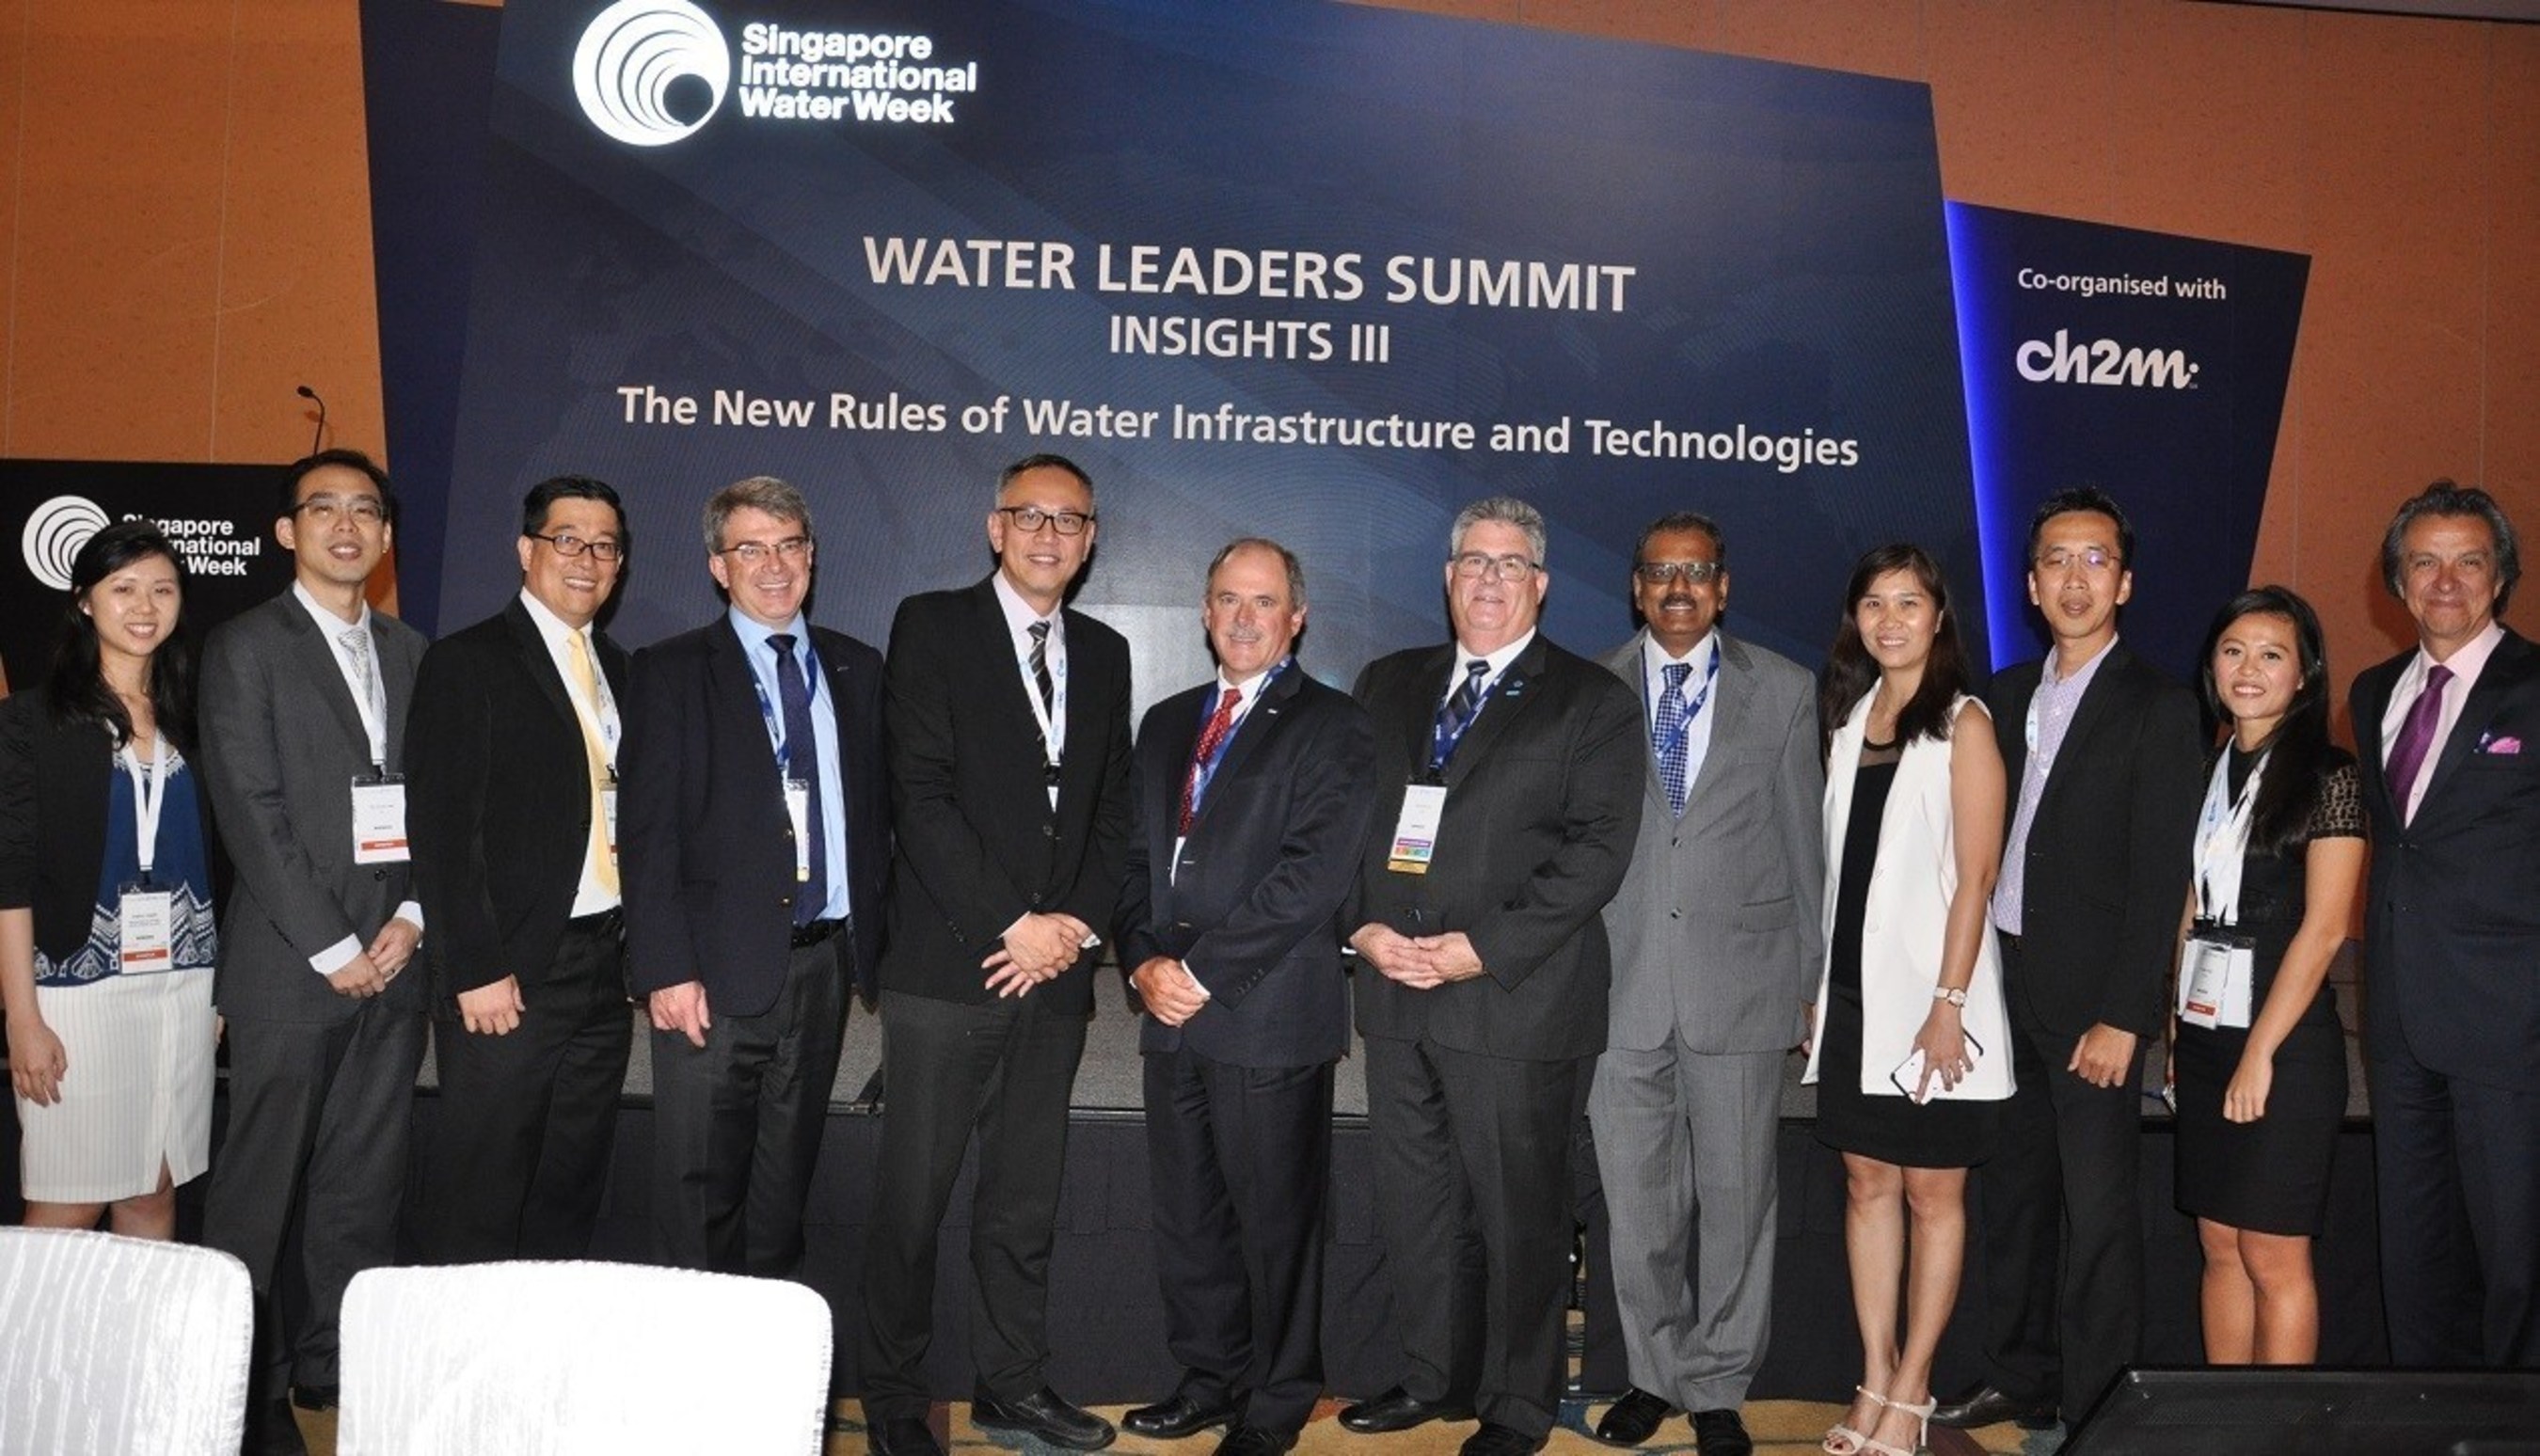 During Singapore International Water Week 2016, CH2M launched a new Leadership Development Programme at its Singapore InfraHub--a strategic infrastructure hub positioned to address Asia's growing infrastructure gap by investing in the firm's Singapore operations, local delivery and expertise.